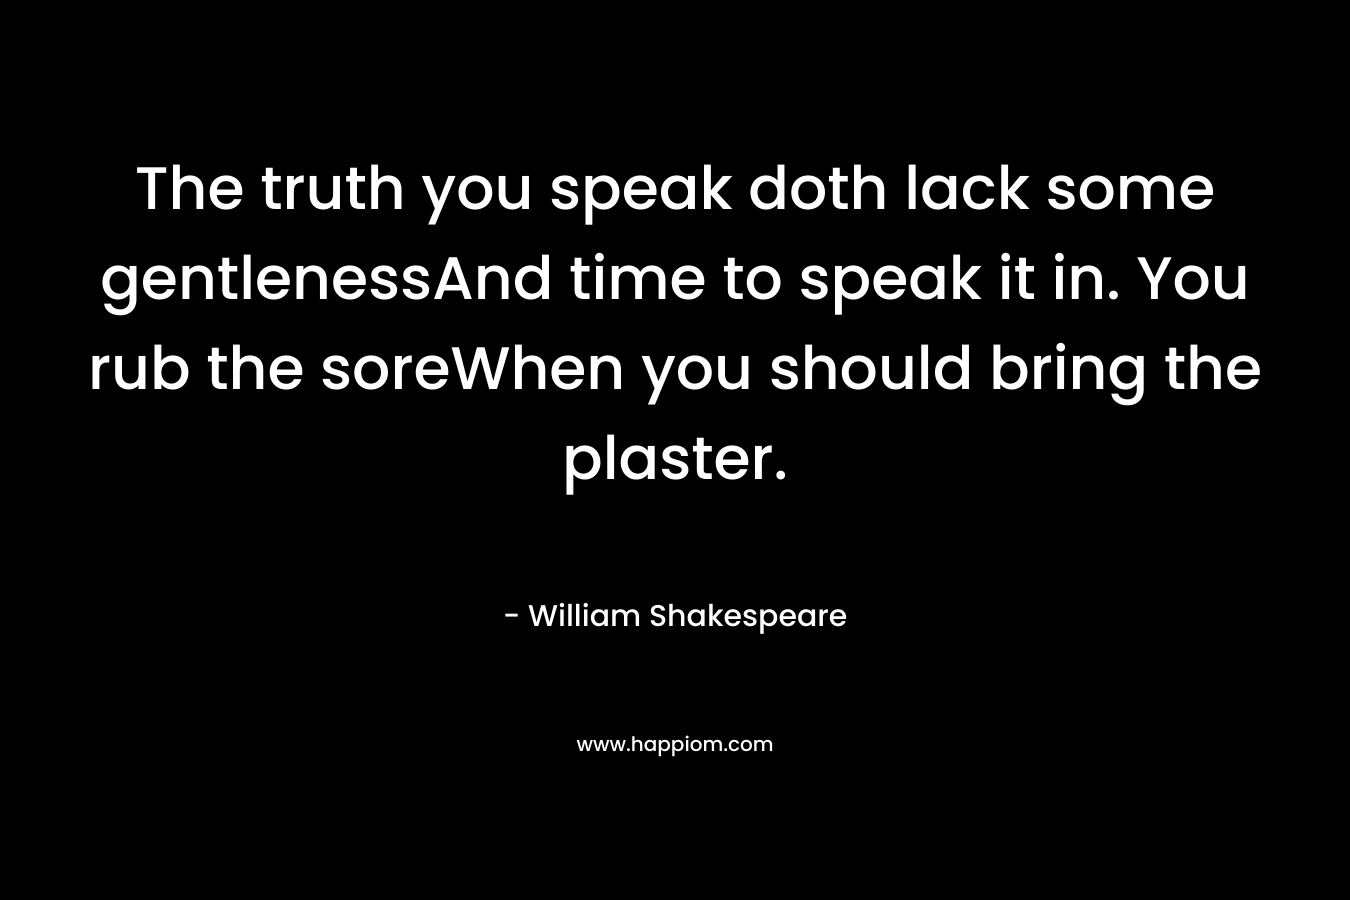 The truth you speak doth lack some gentlenessAnd time to speak it in. You rub the soreWhen you should bring the plaster.